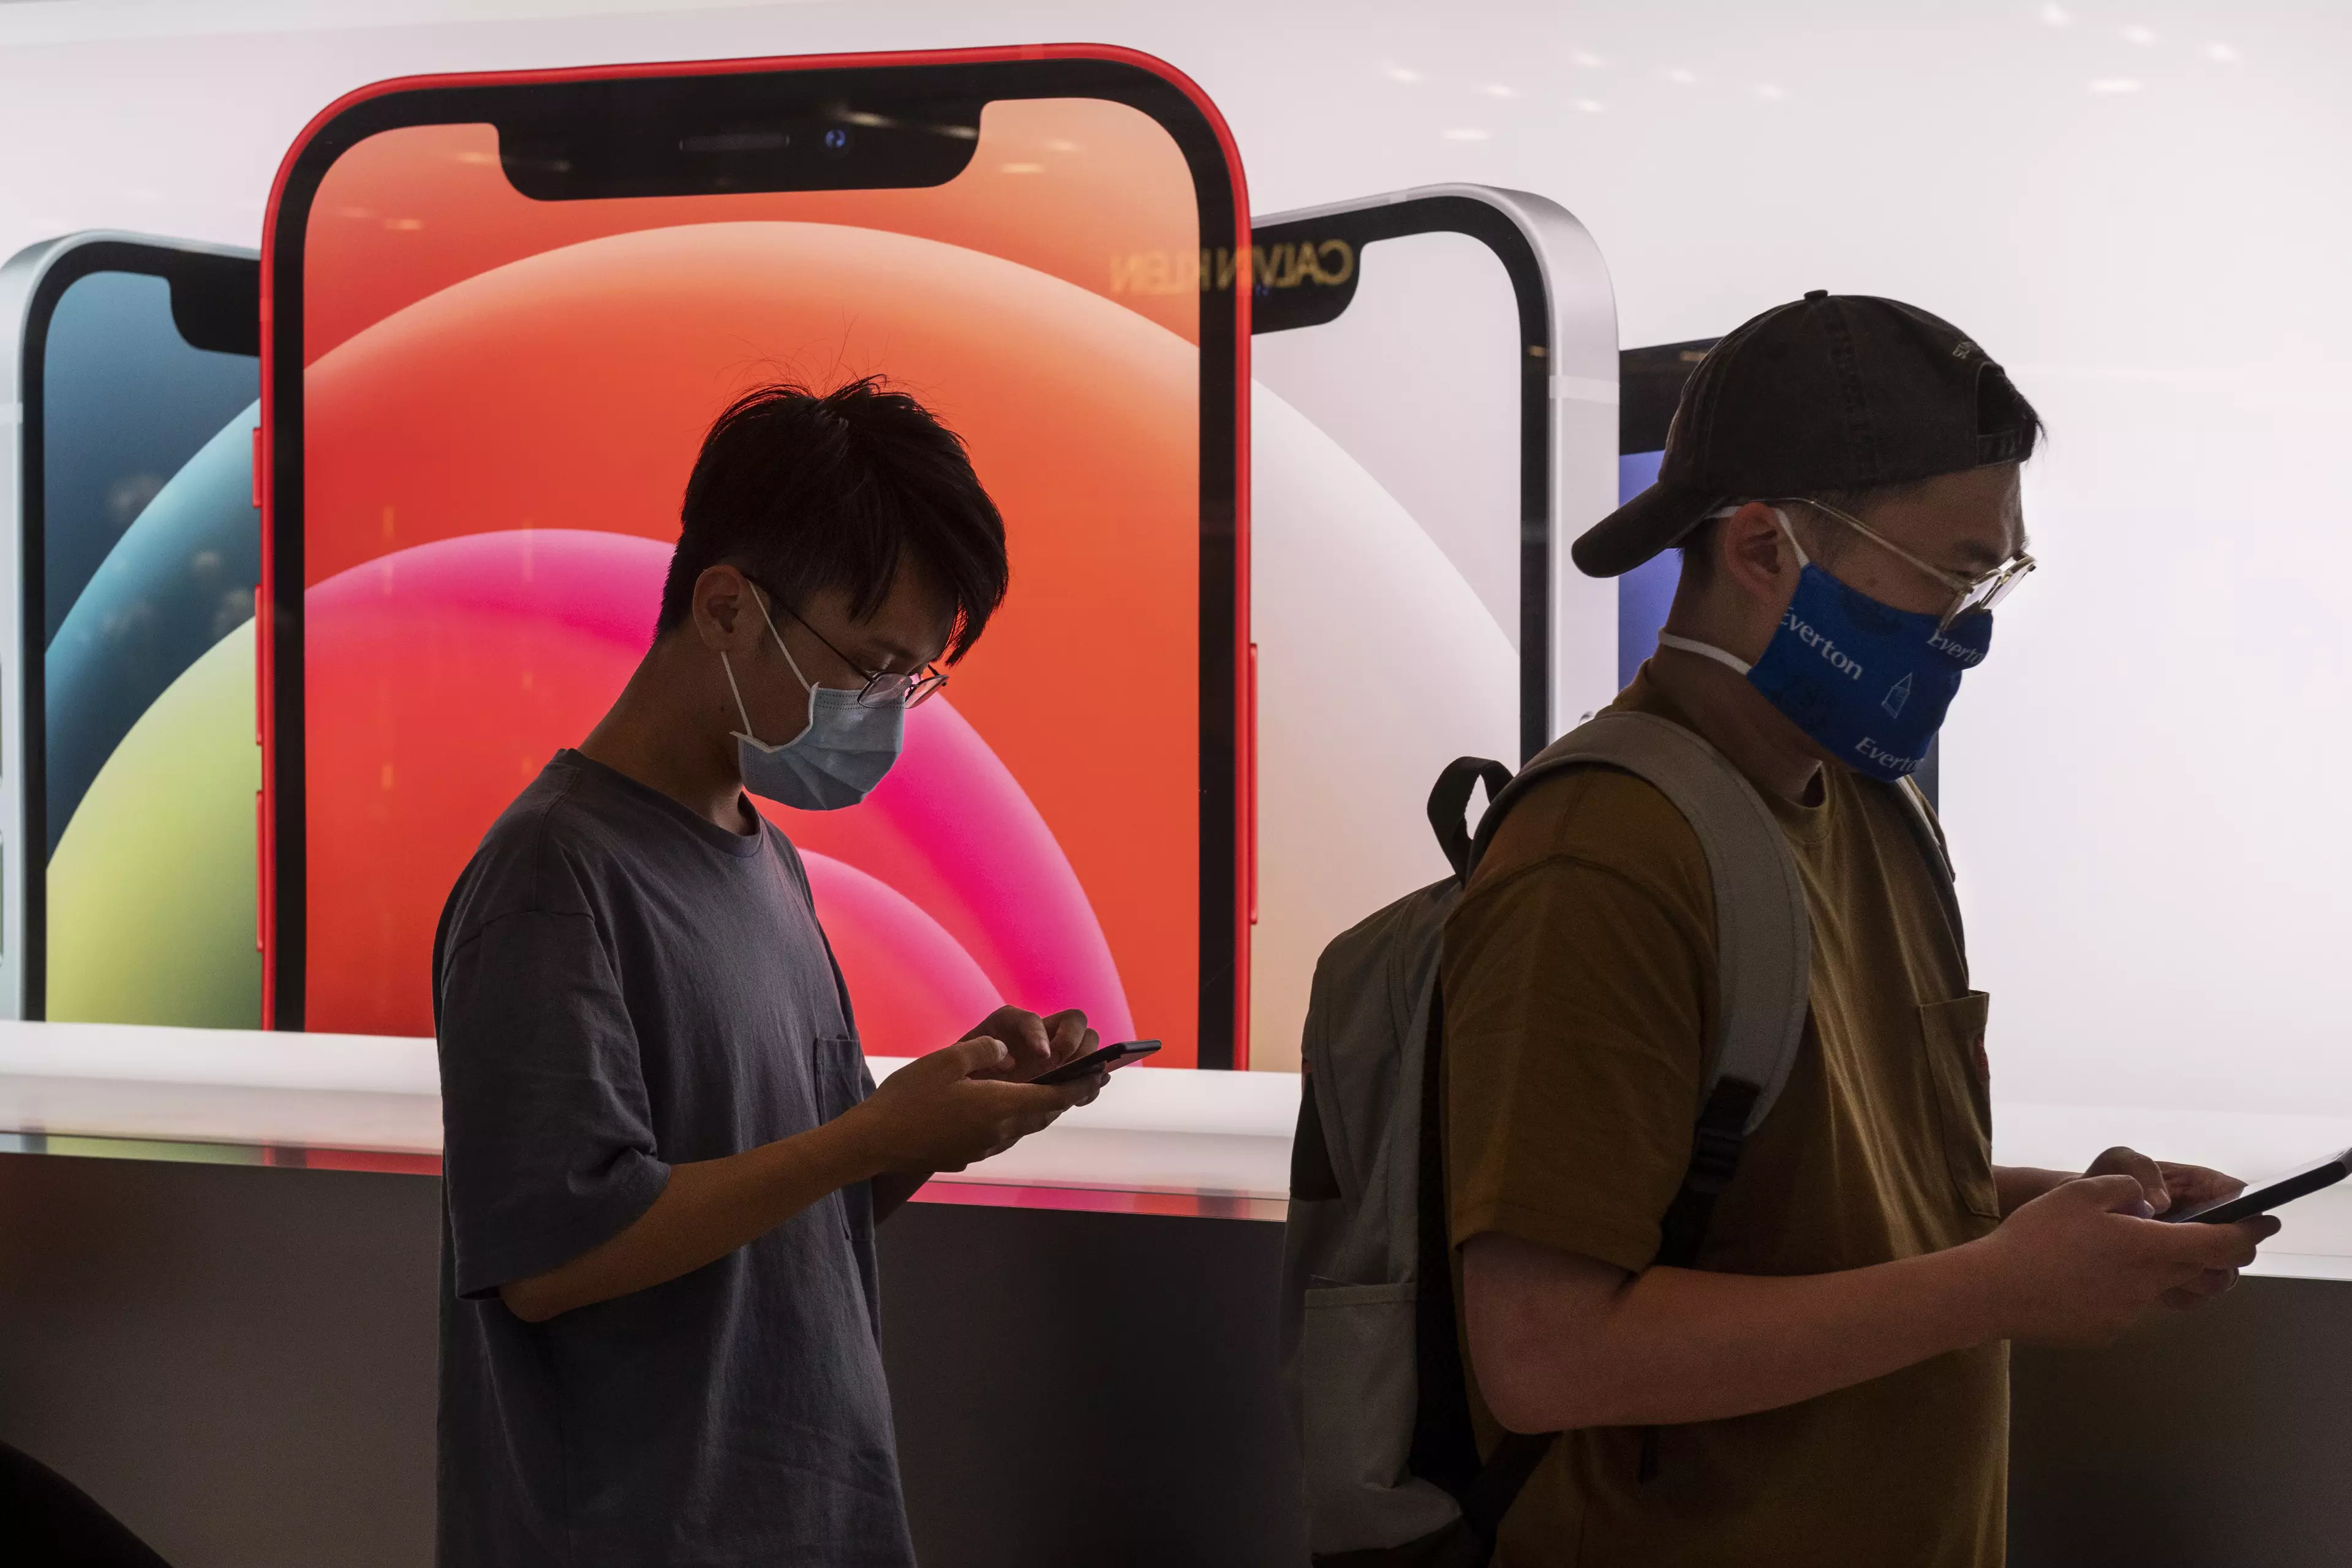 The new iPhone update will make it easier to unlock the device while wearing a mask.